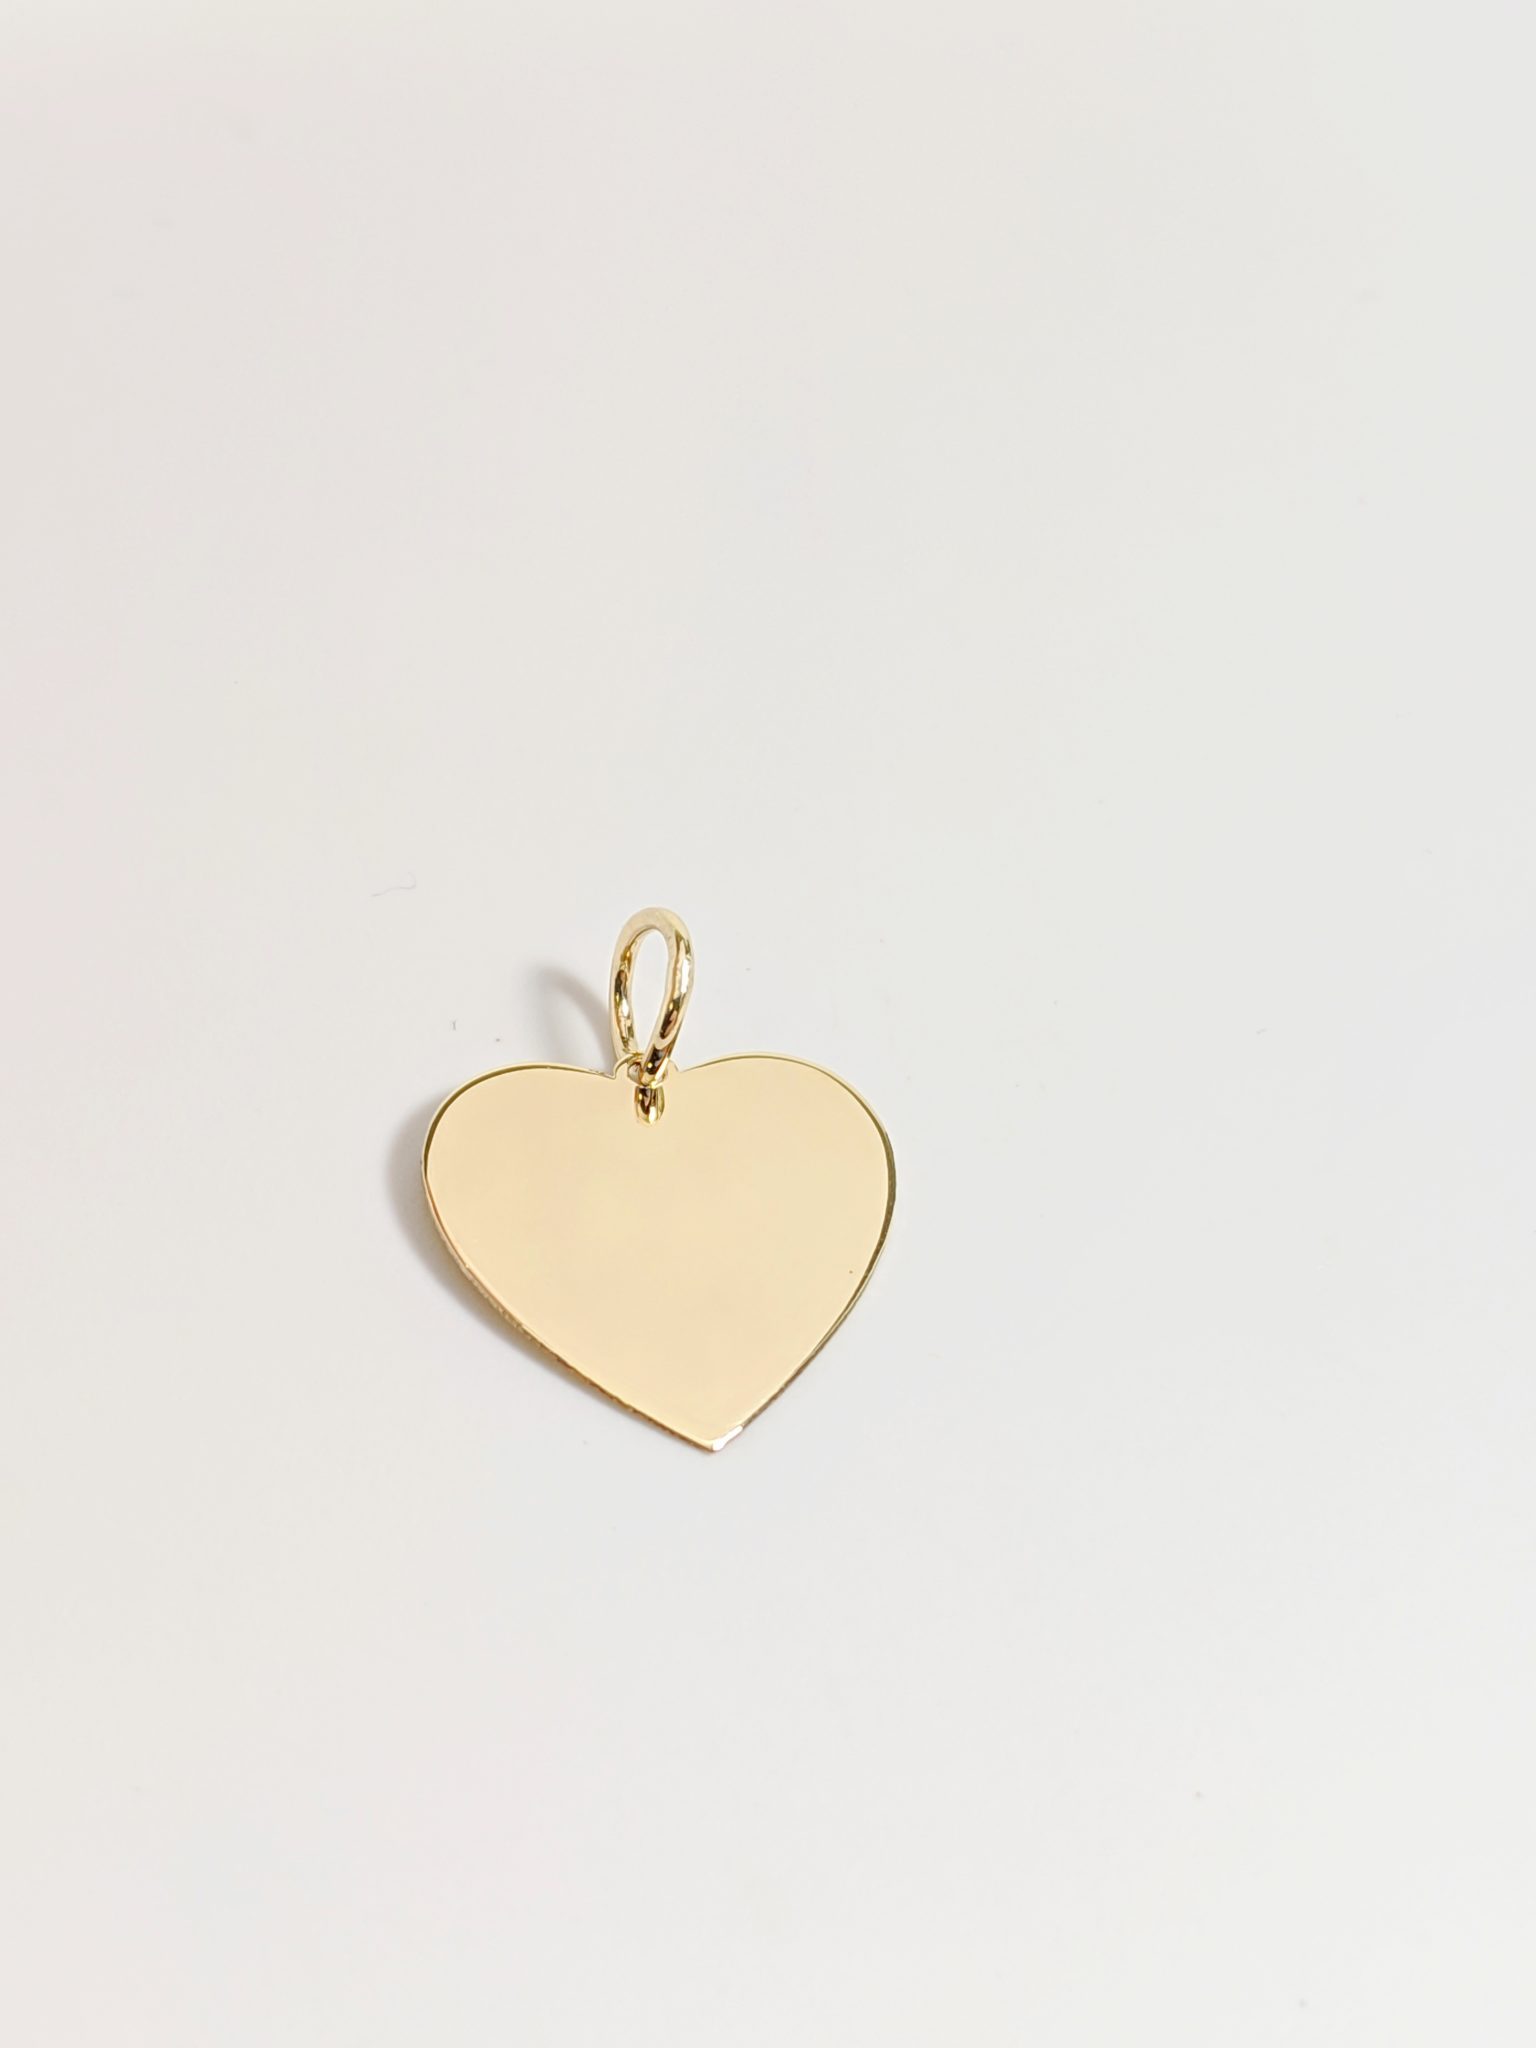 14K Tiffany Heart Yellow Gold Disk Pendant Engrave Engravable Flat Heart Charm Finger Print Custom Customized Love Gifts For Her Front Side